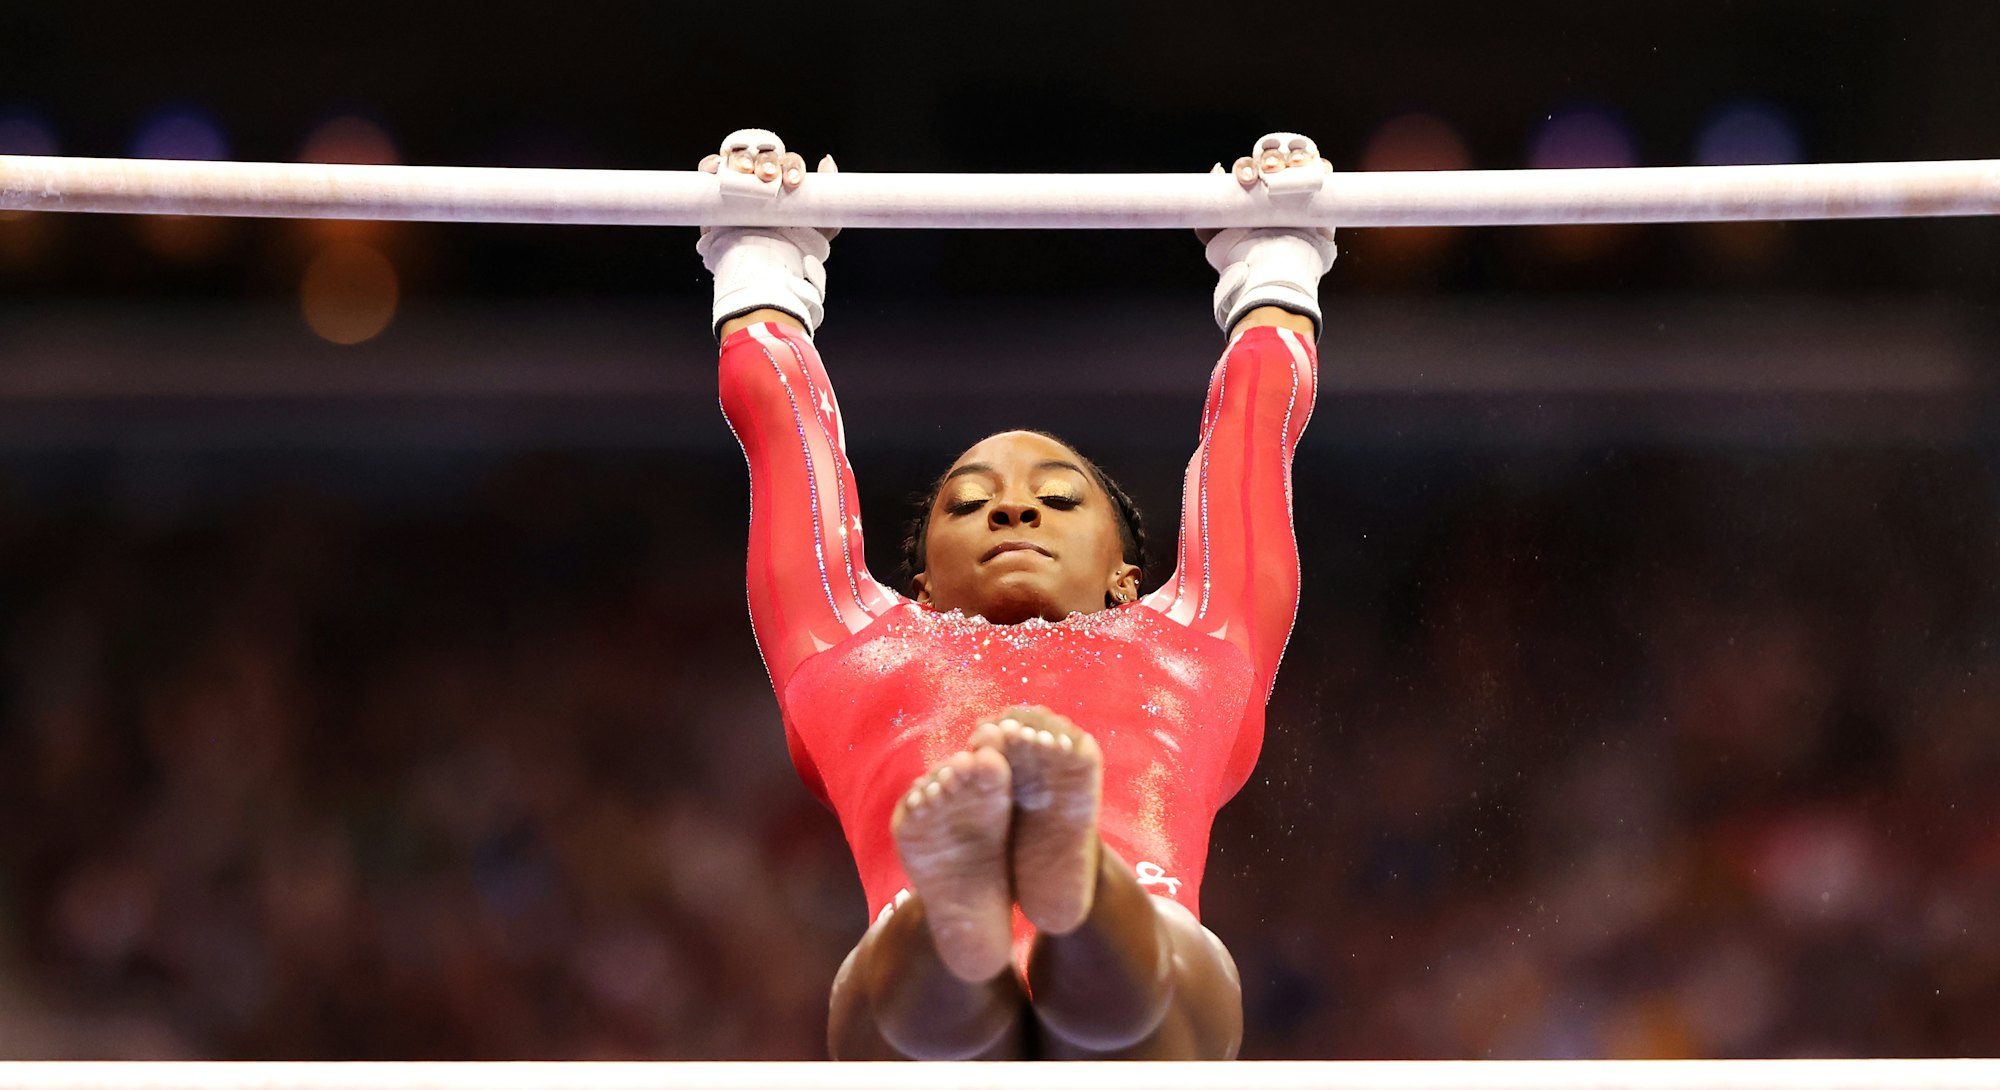 ST LOUIS, MISSOURI - JUNE 27: Simone Biles competes on the uneven bars during the Women's competitio...